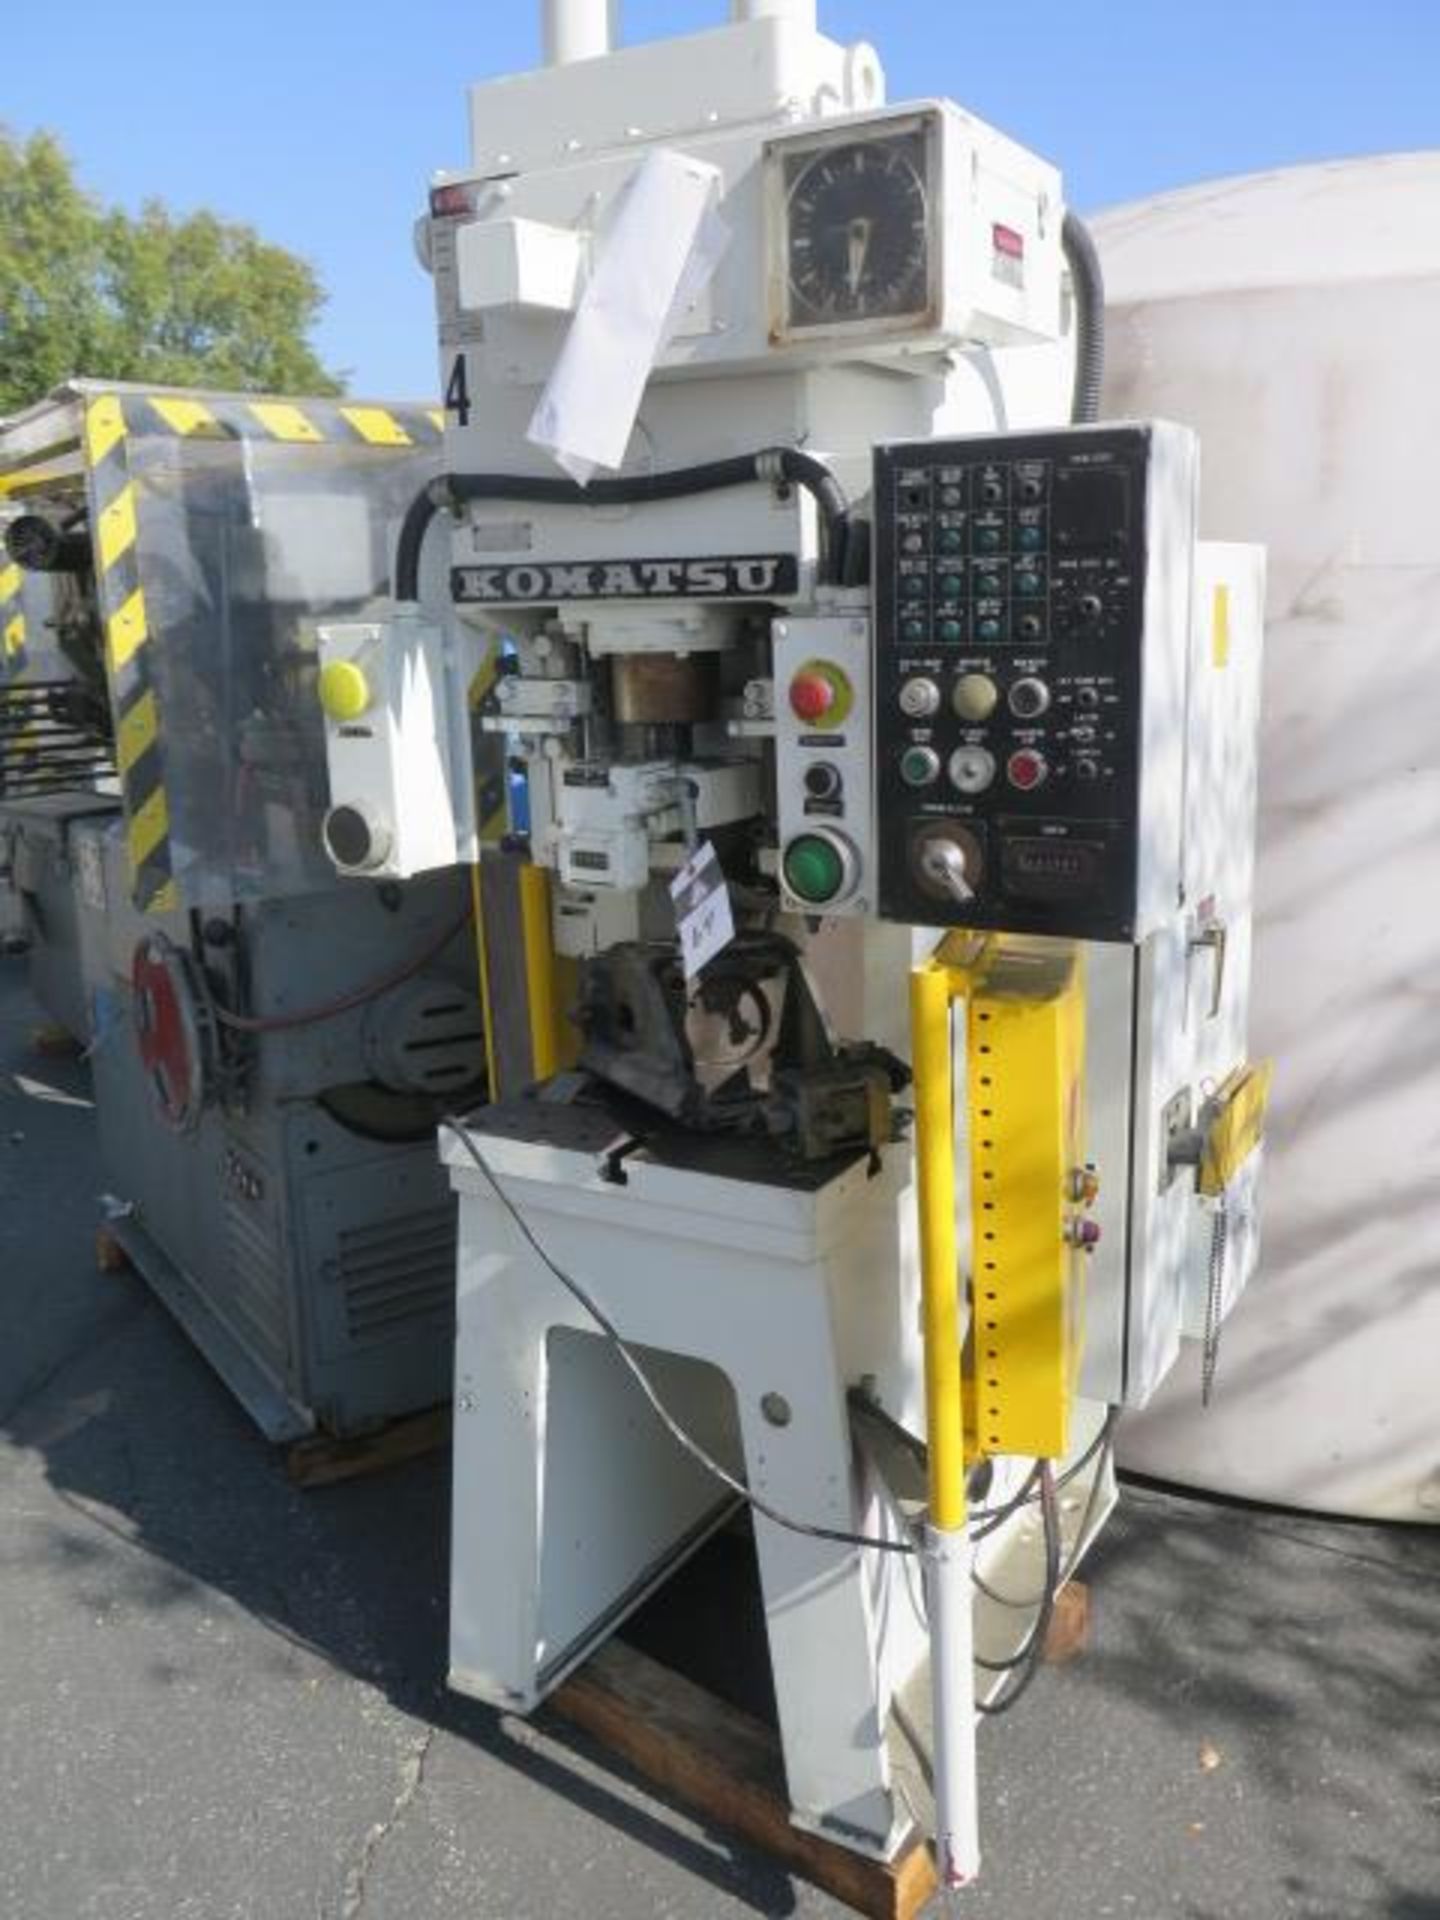 Komatsu OBS25-2 25 Ton Stamping Press (FOR PARTS ONLY - BROKEM RAM) s/n 10676, SOLD AS-IS - NO WARRA